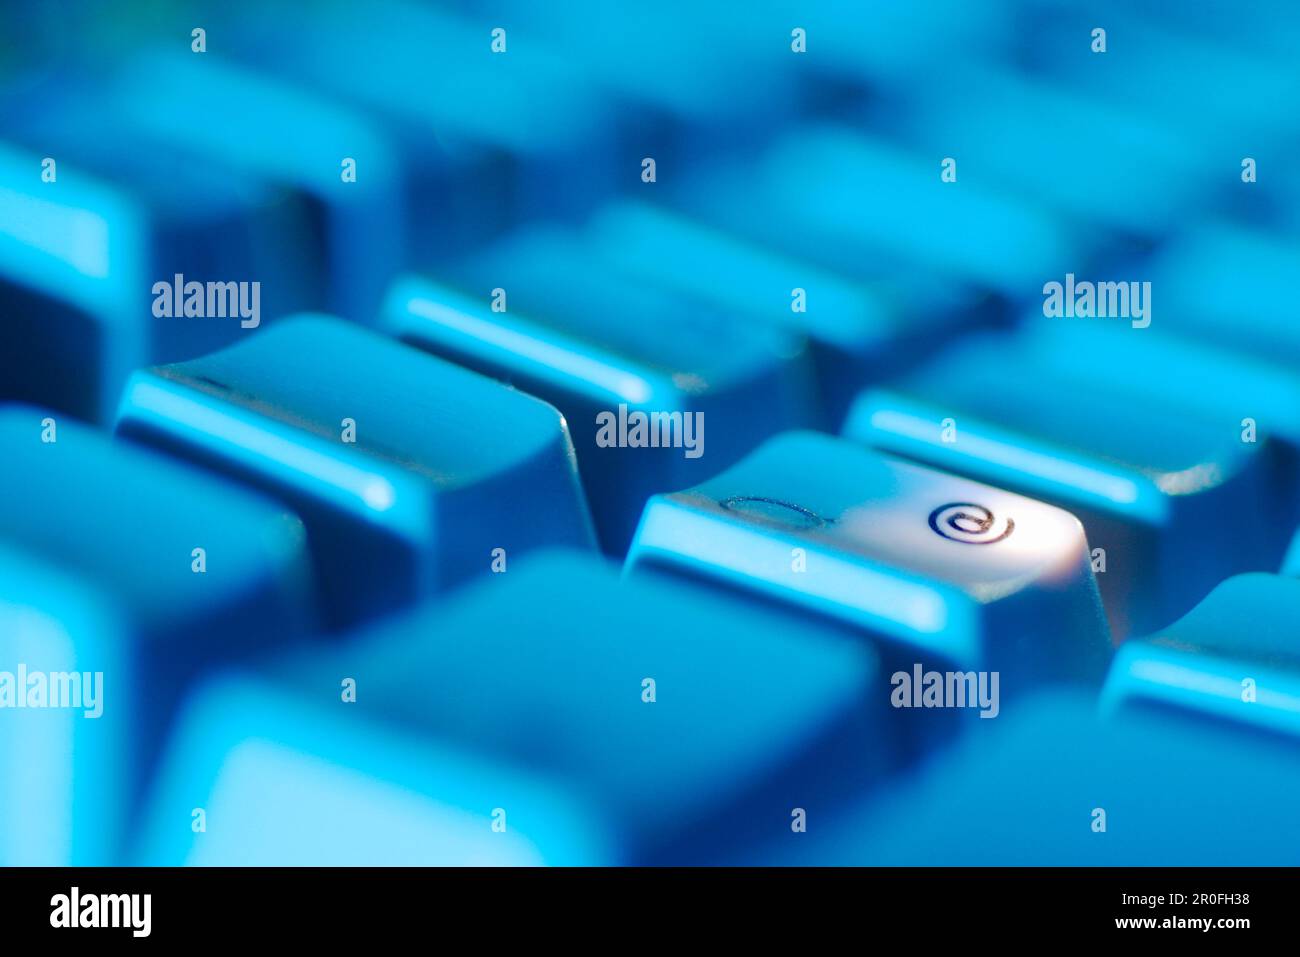 Keyboard,Appel,@ sign Stock Photo